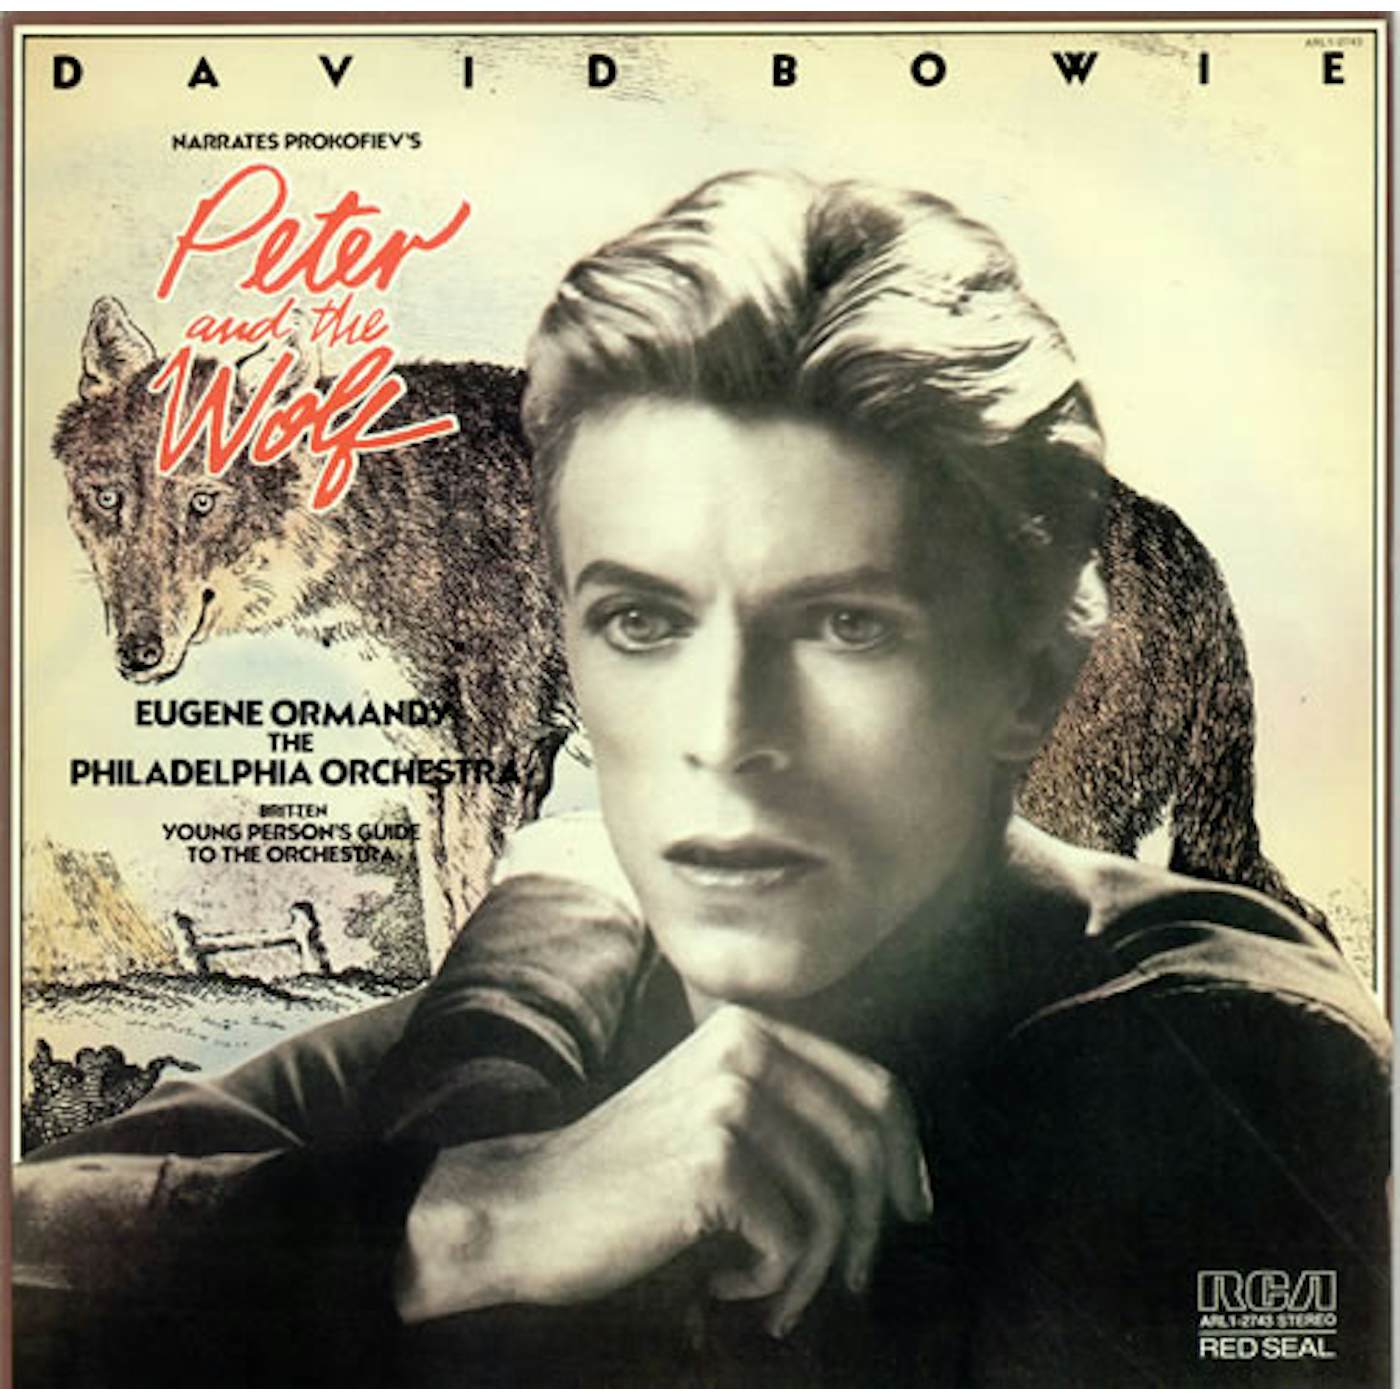 David Bowie Peter & The Wolf Vinyl Record